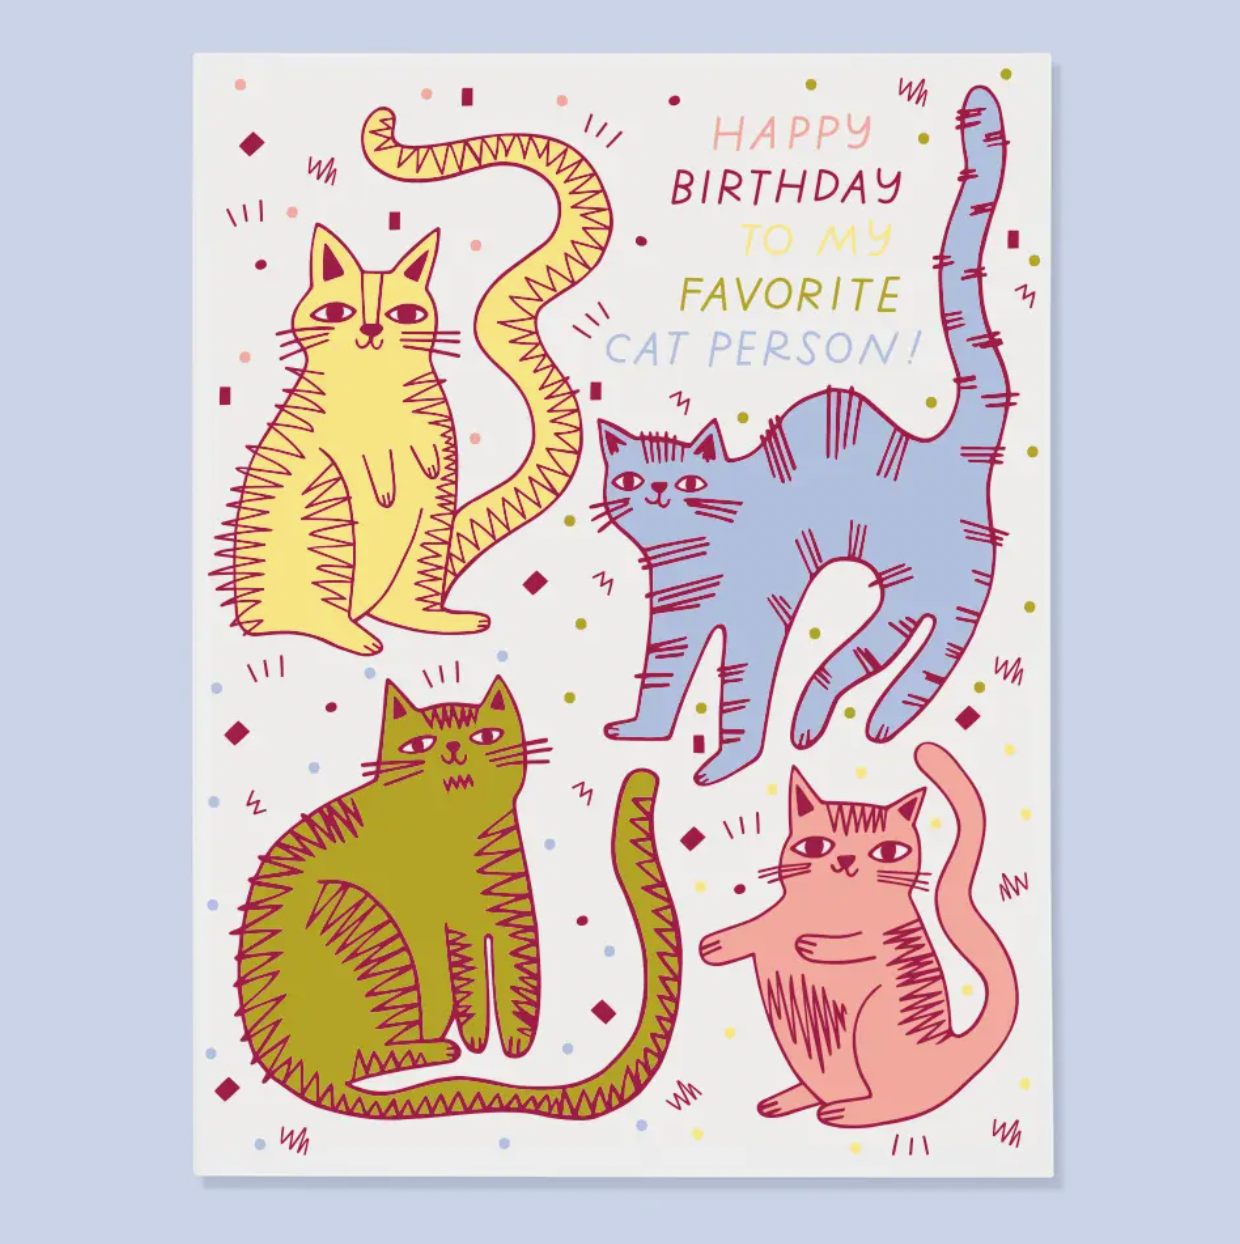 THE GOOD TWIN Cat Person Card